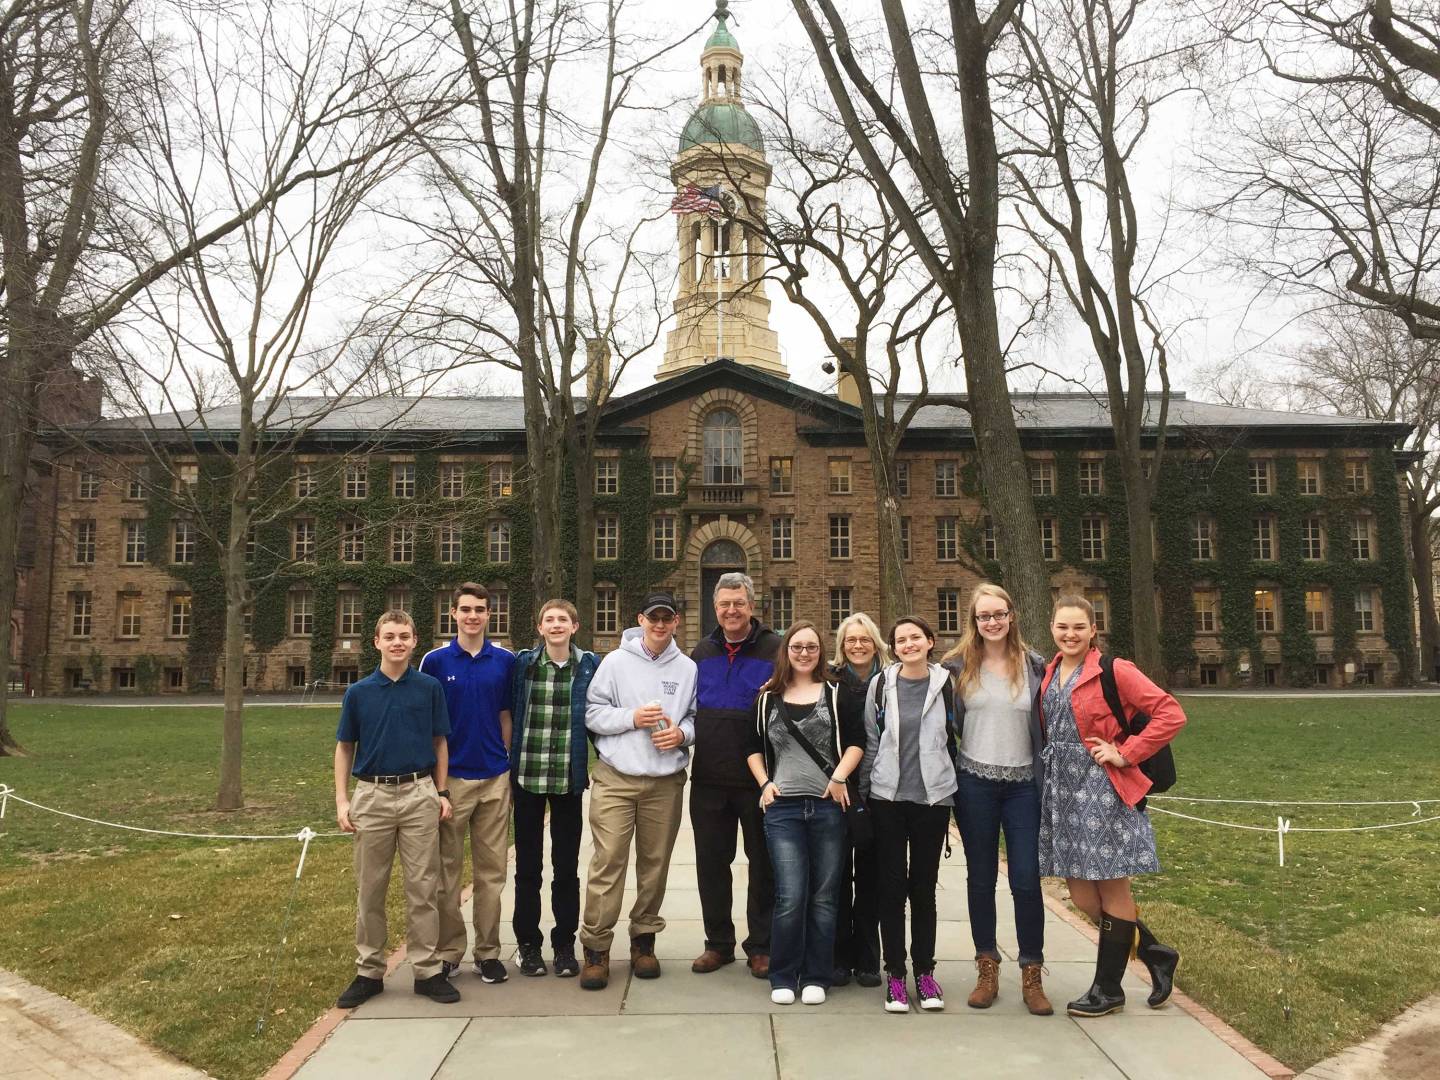 Emma Treadway and high school classmates in front of Nassau Hall on a field trip